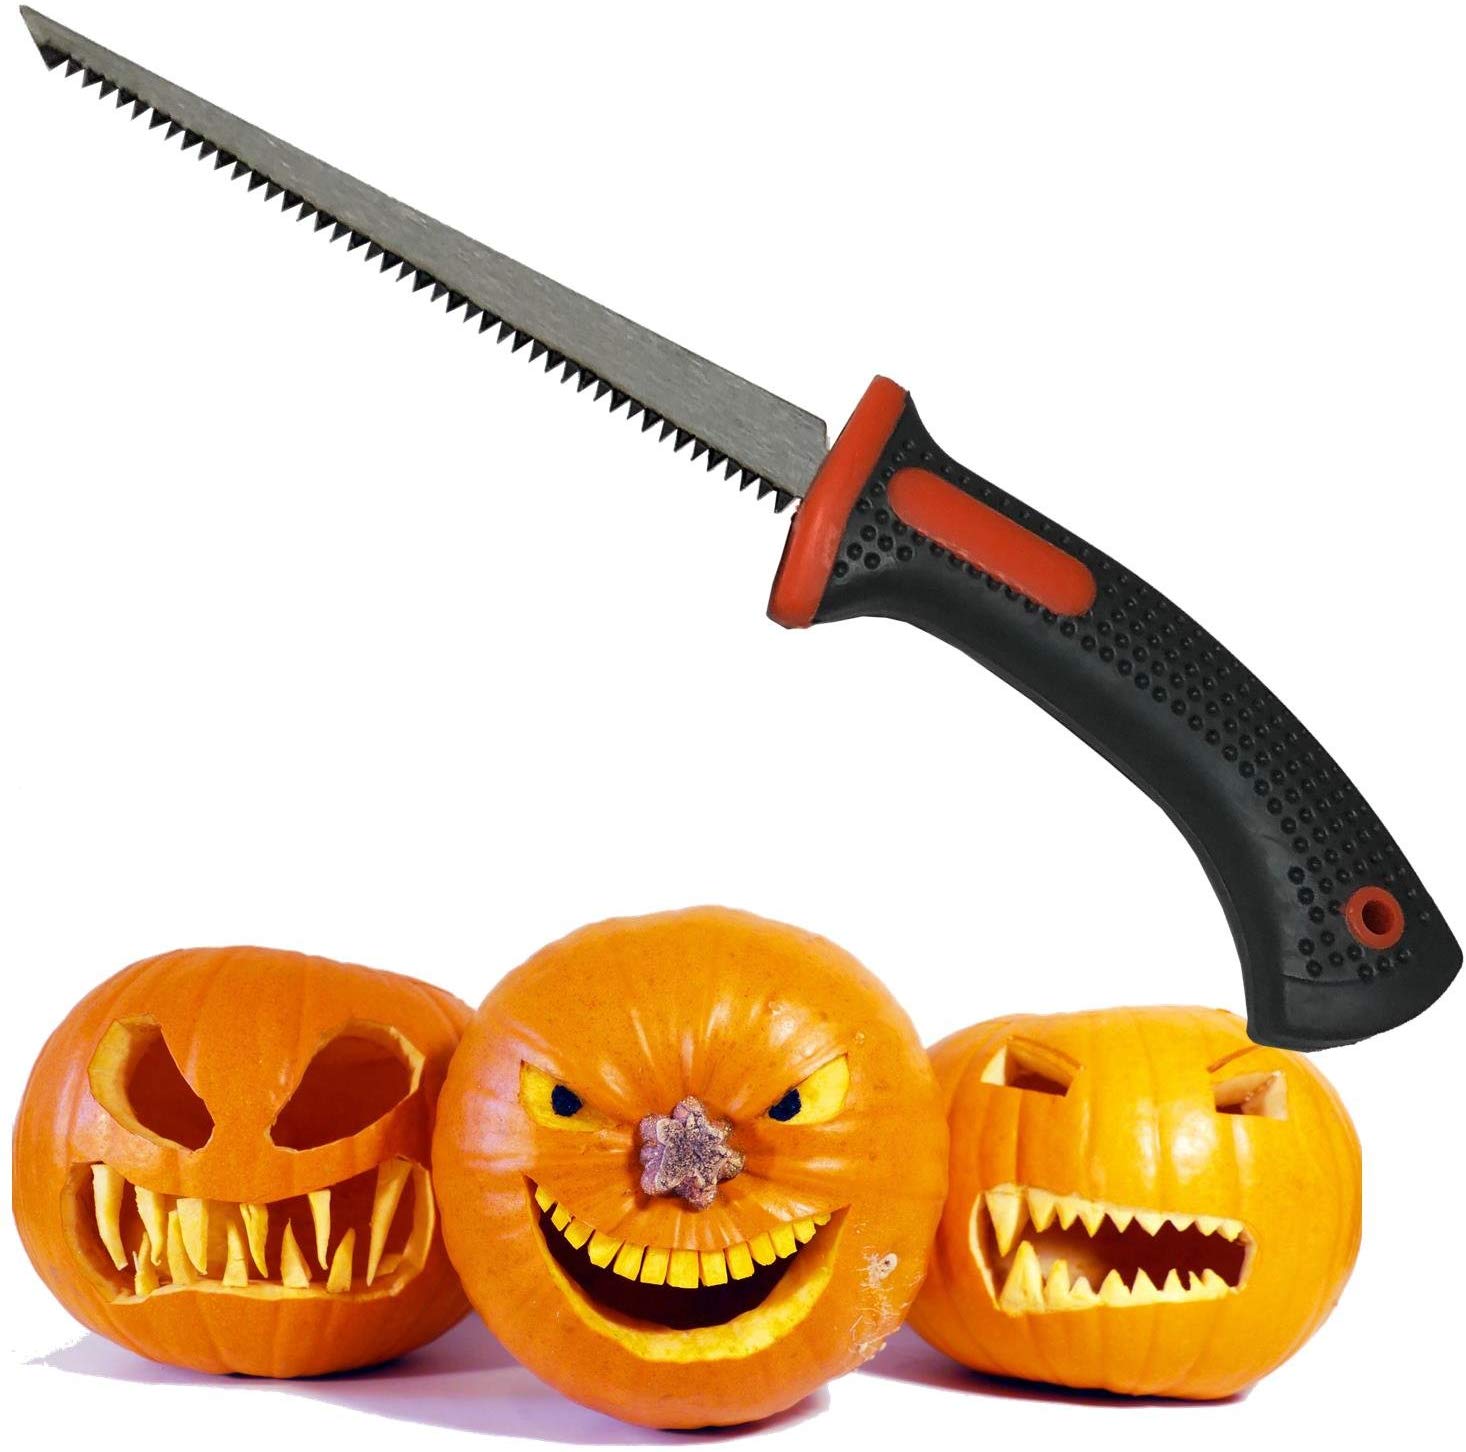 Pumpkin Carving Tools Kit 13 Pieces Heavy Duty Stainless Steel Pumpkin Carving Tool Jack-O-Lantern Sculpting Set with Storage Tool Bag Halloween Party Supplies